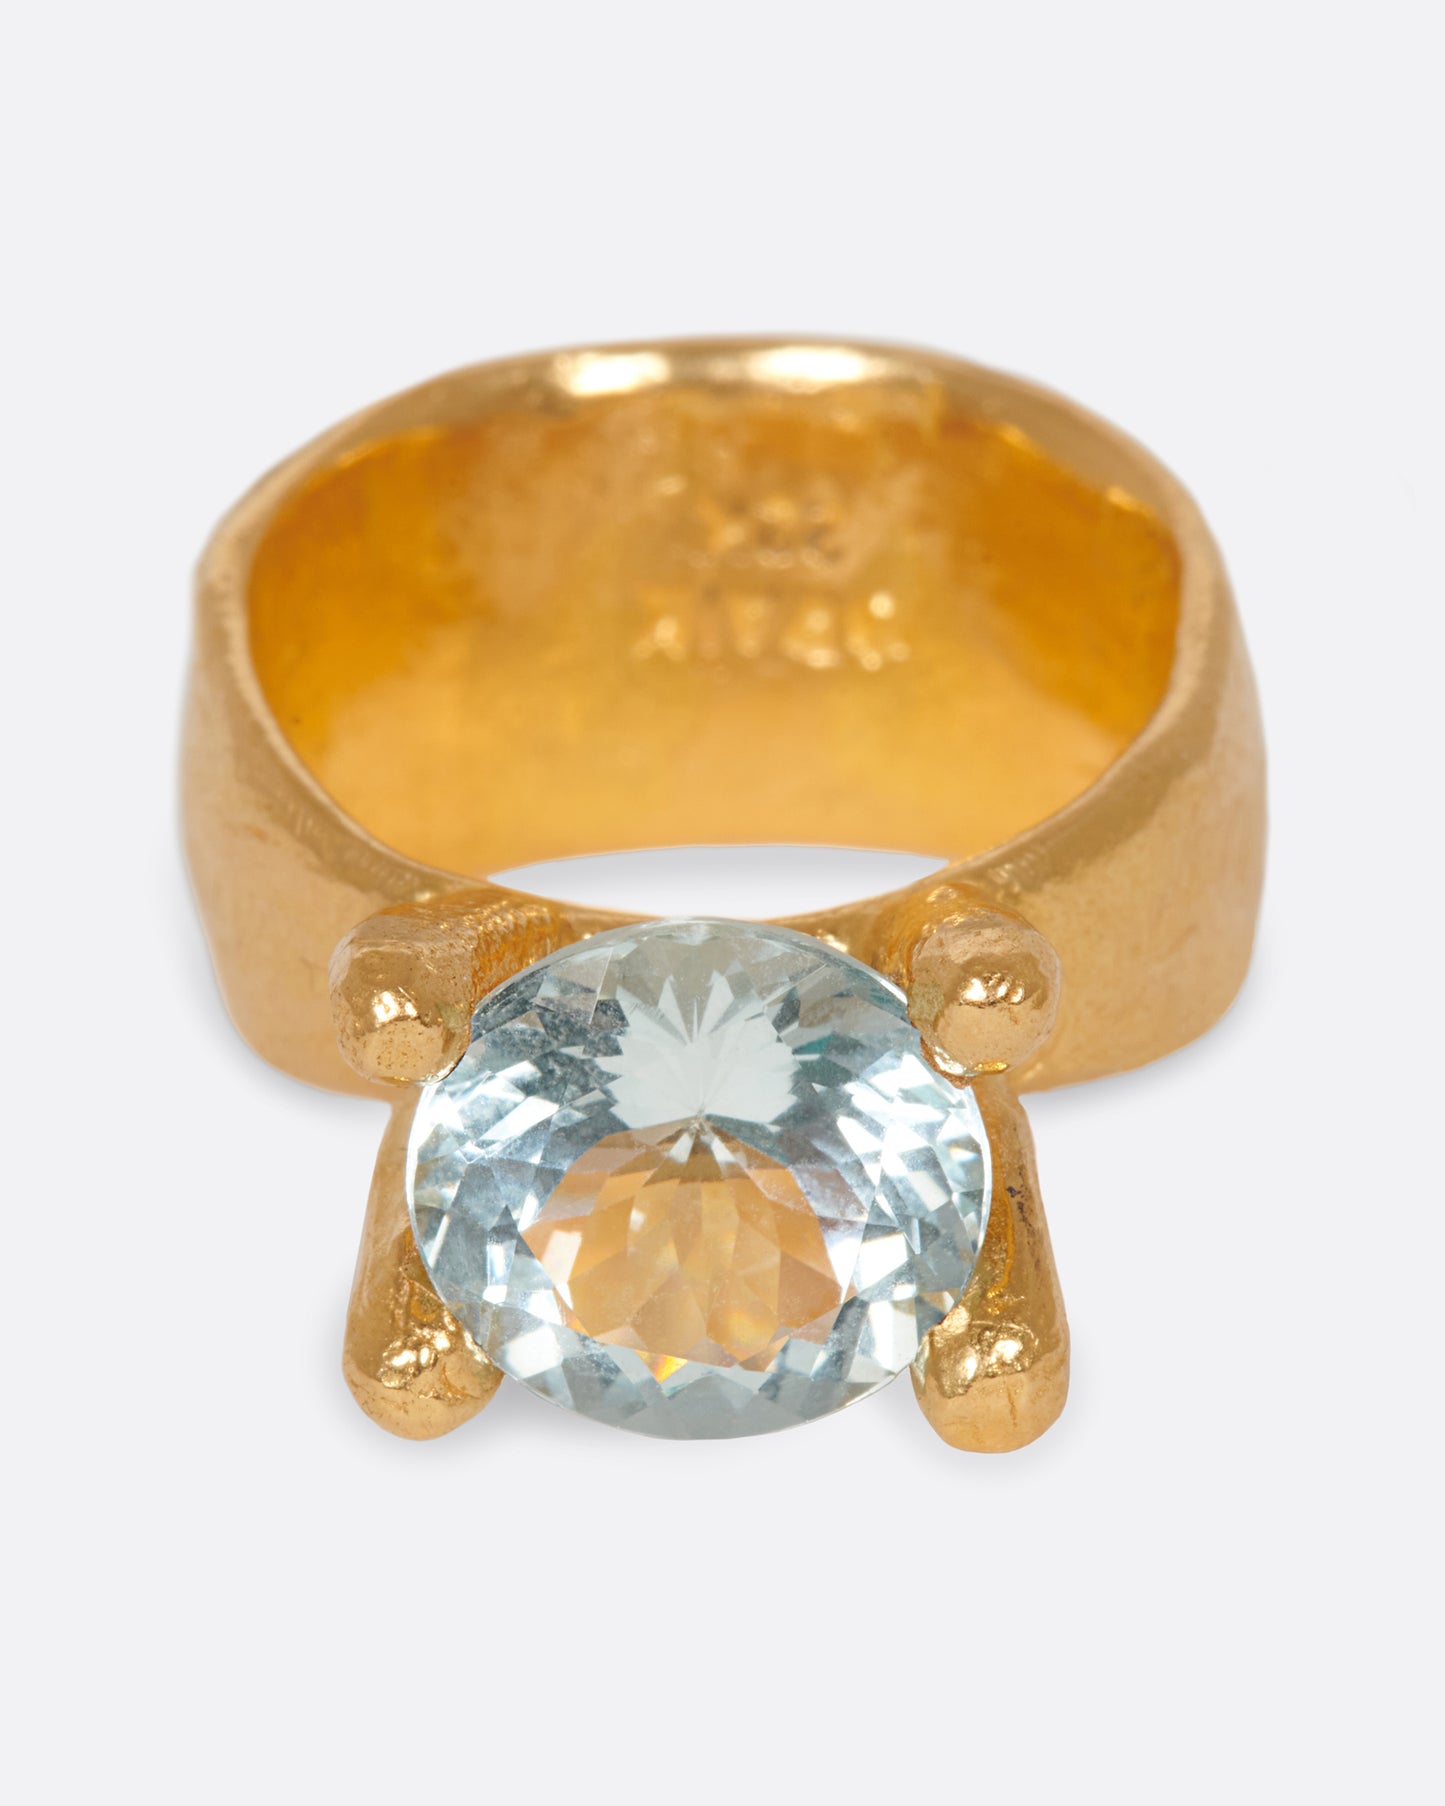 Hand-formed, high karat gold prongs contain a glorious aquamarine atop this ring.